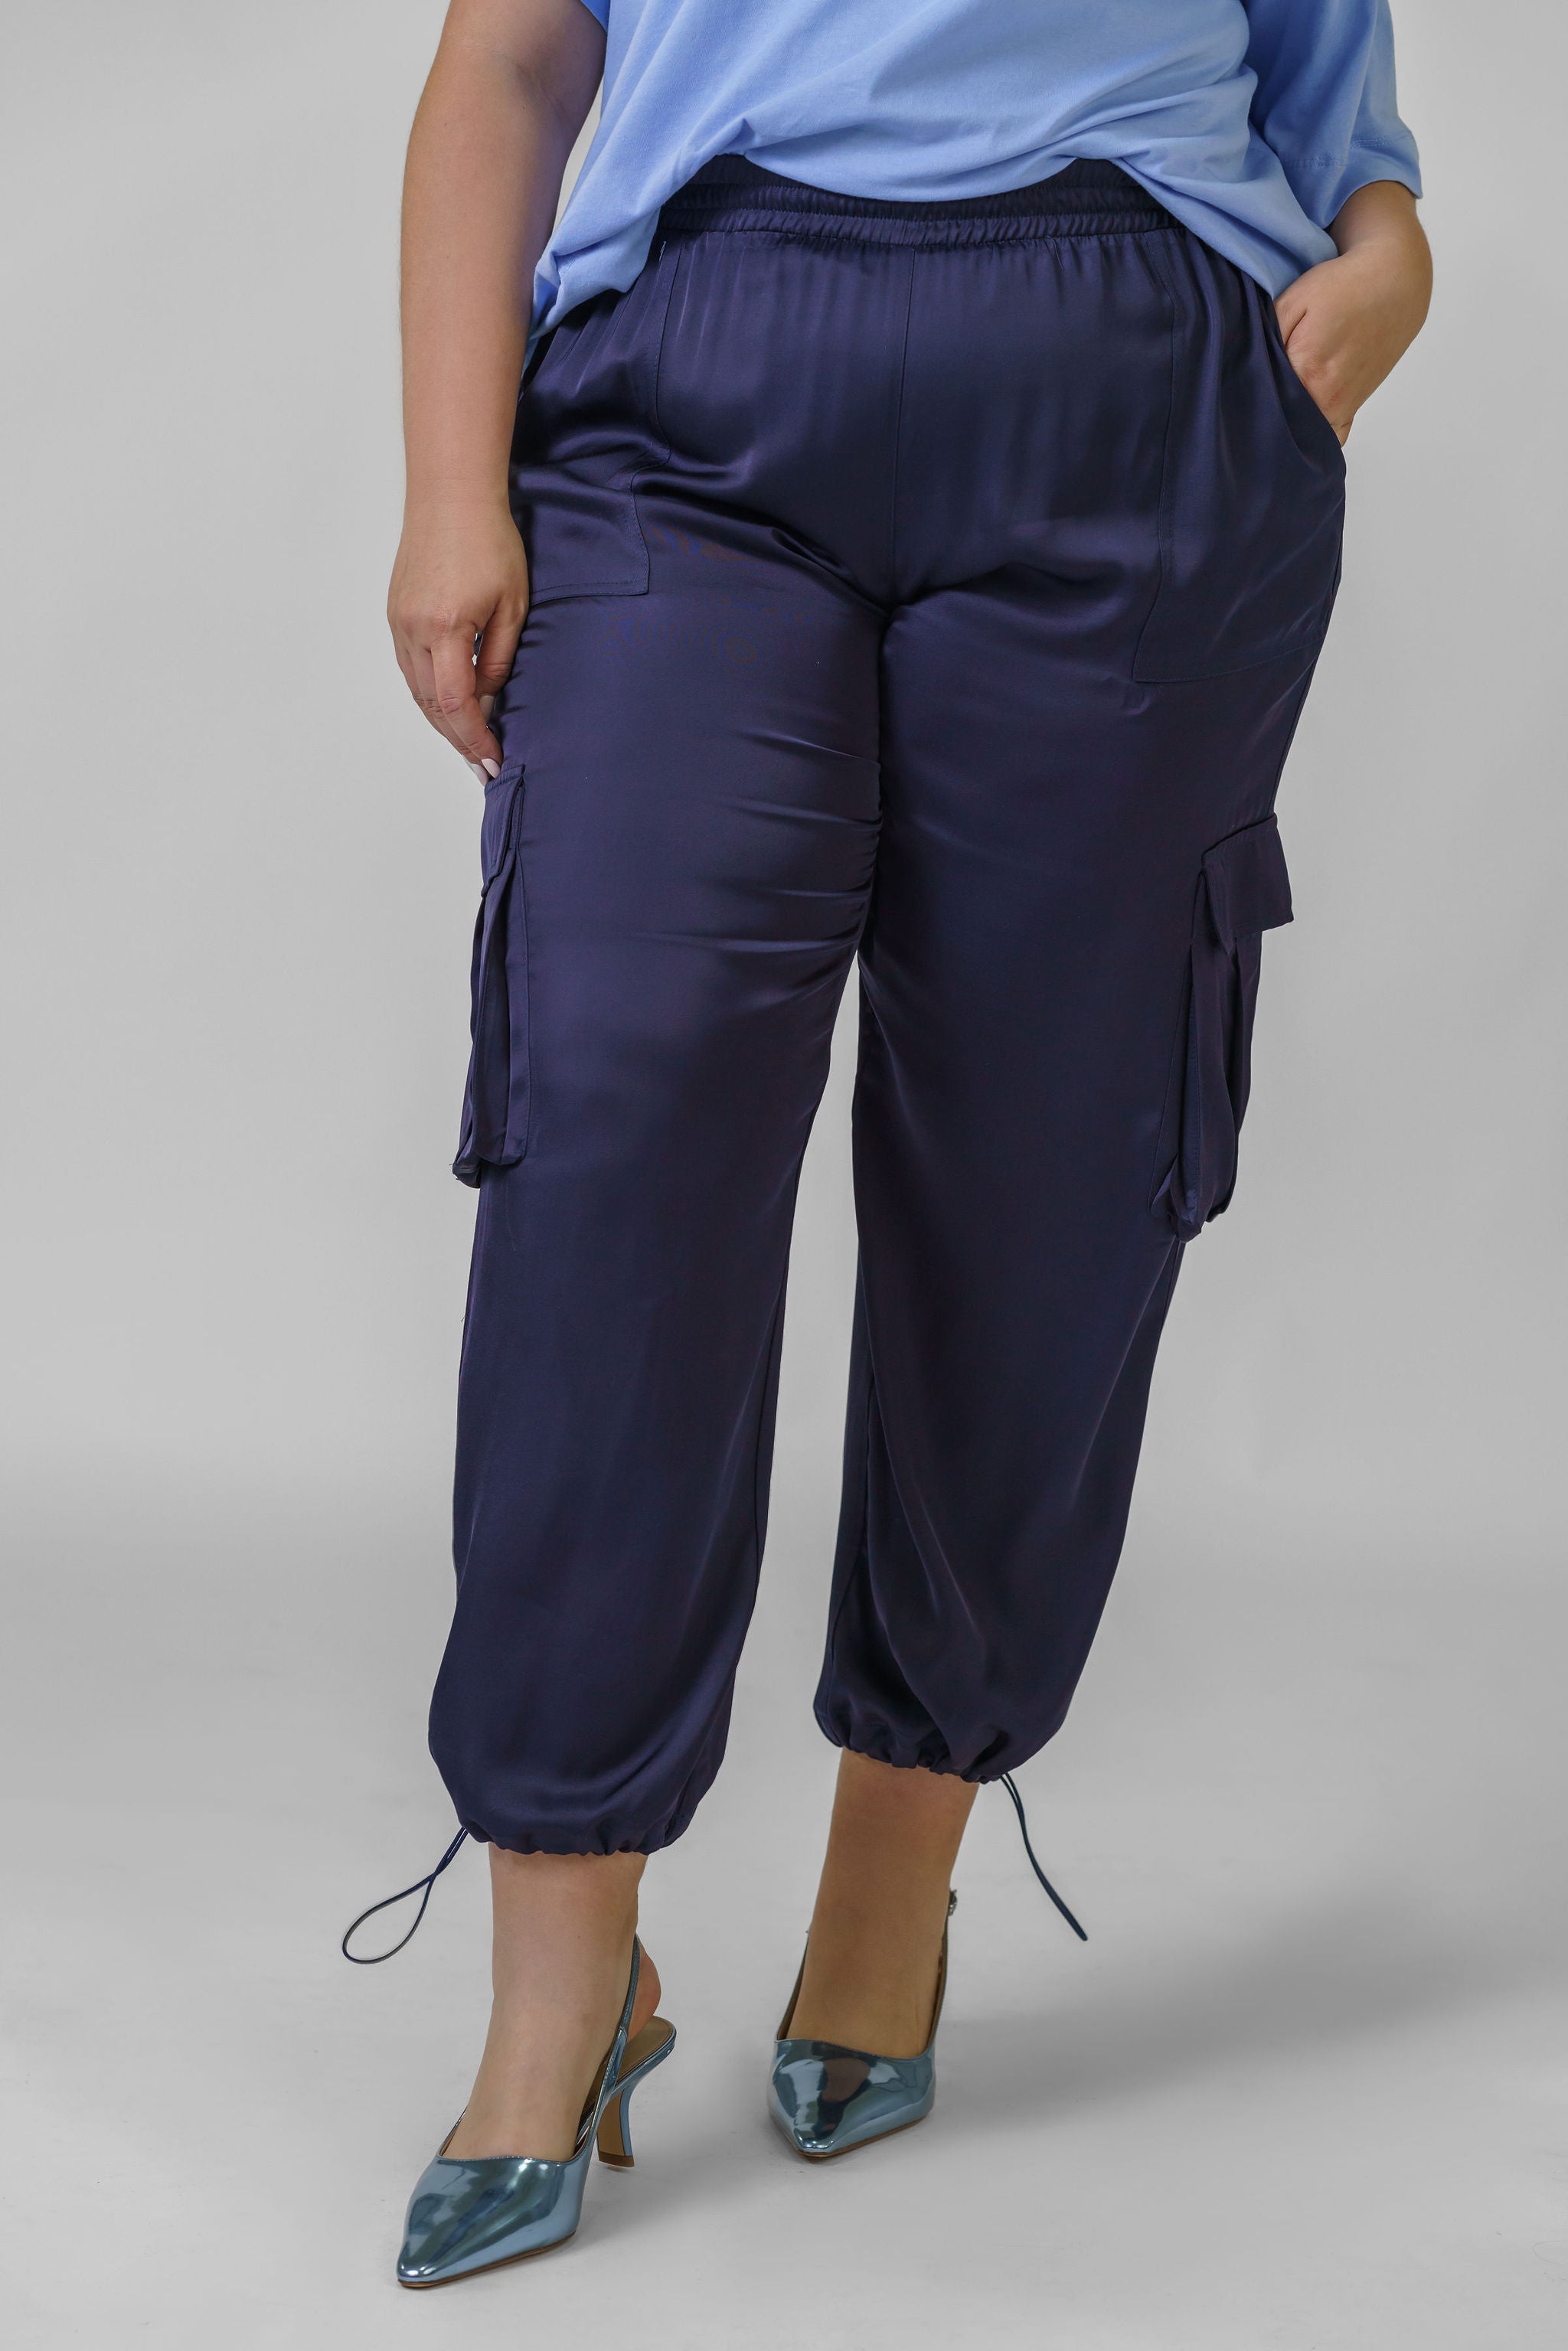 CARGO TROUSER - NAVY - AMOUR781